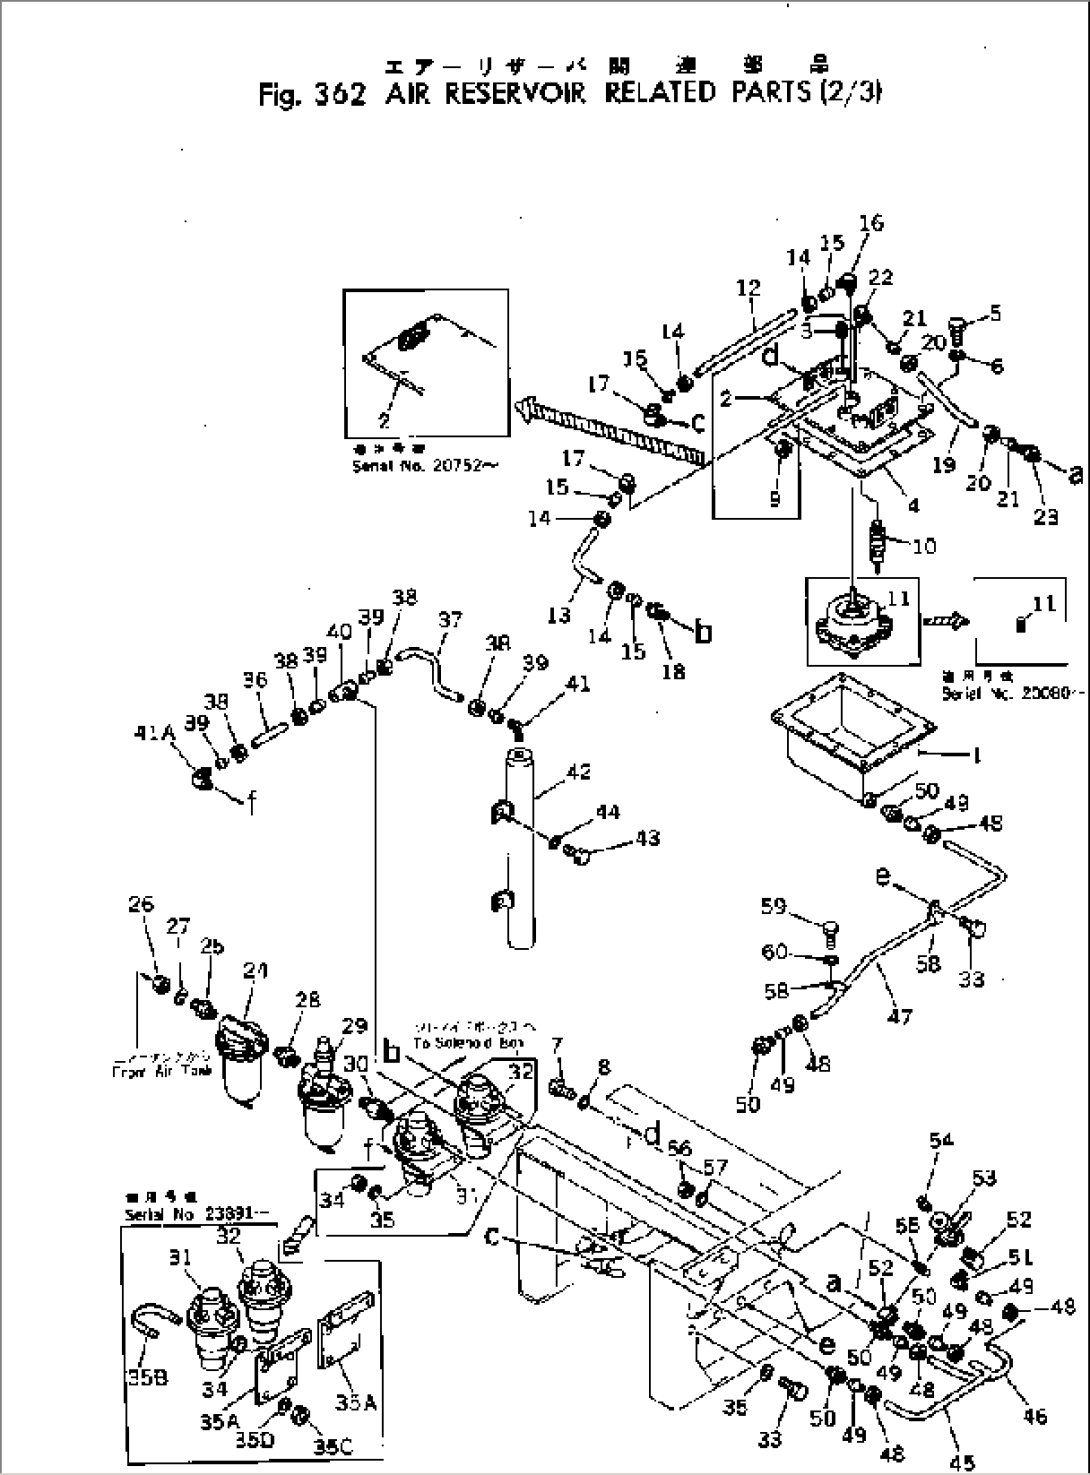 AIR RESERVOIR AND RELATED PARTS (2/3)